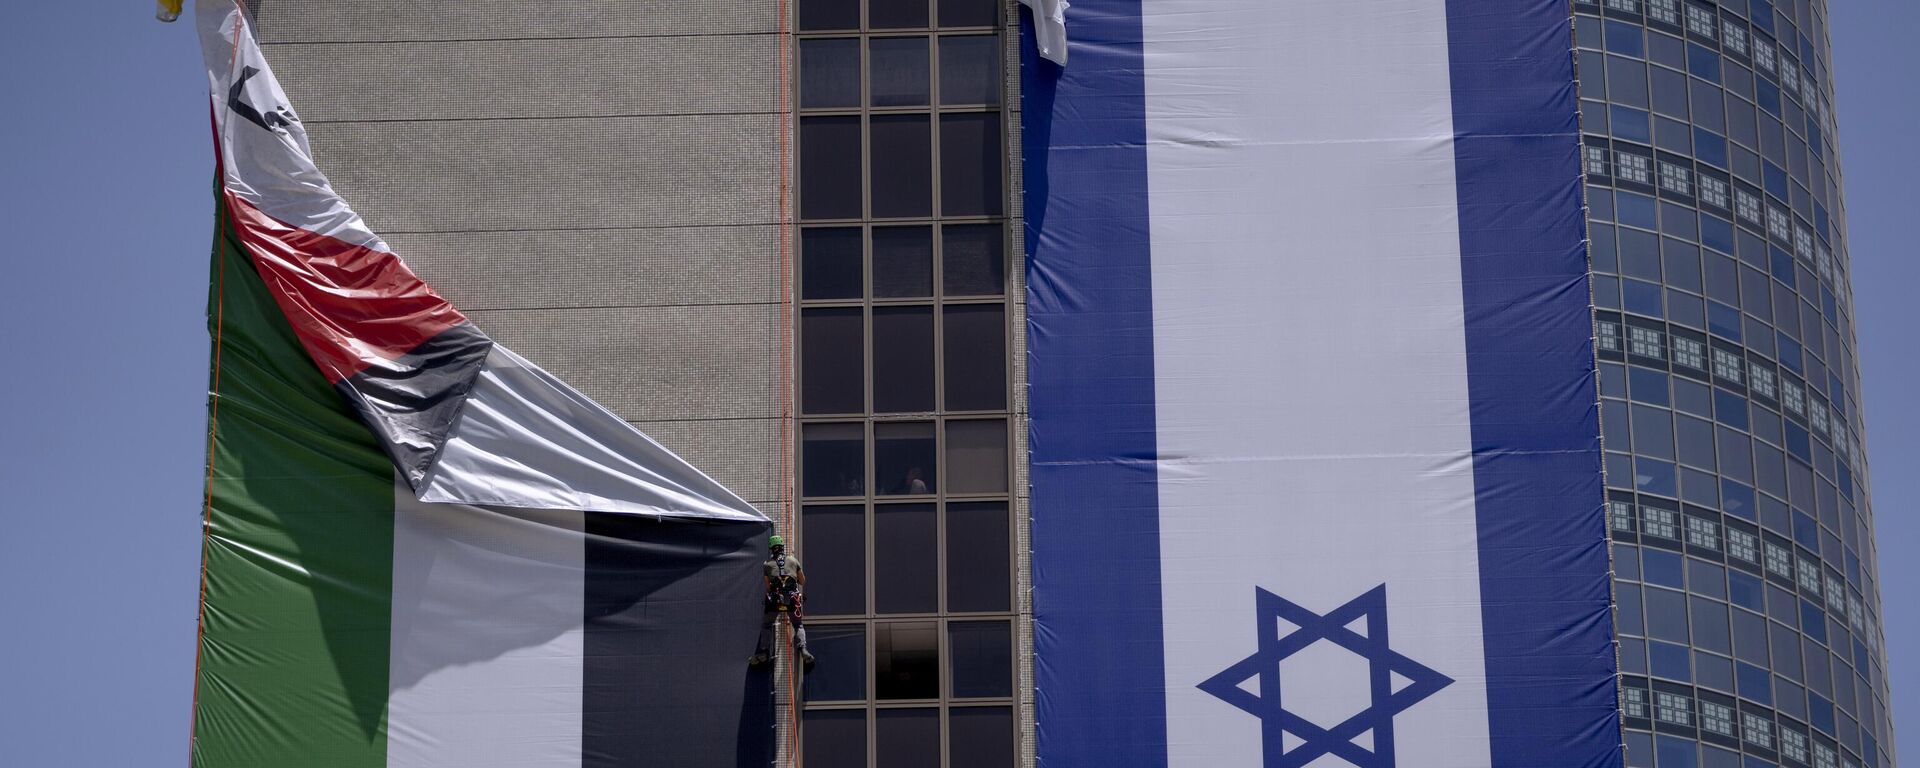 A Palestinian flag is removed from a building by Israeli authorities after being put up by an advocacy group that promotes coexistence between Palestinians and Israelis, in Ramat Gan, Israel, Wednesday, June 1, 2022 - Sputnik International, 1920, 07.02.2024